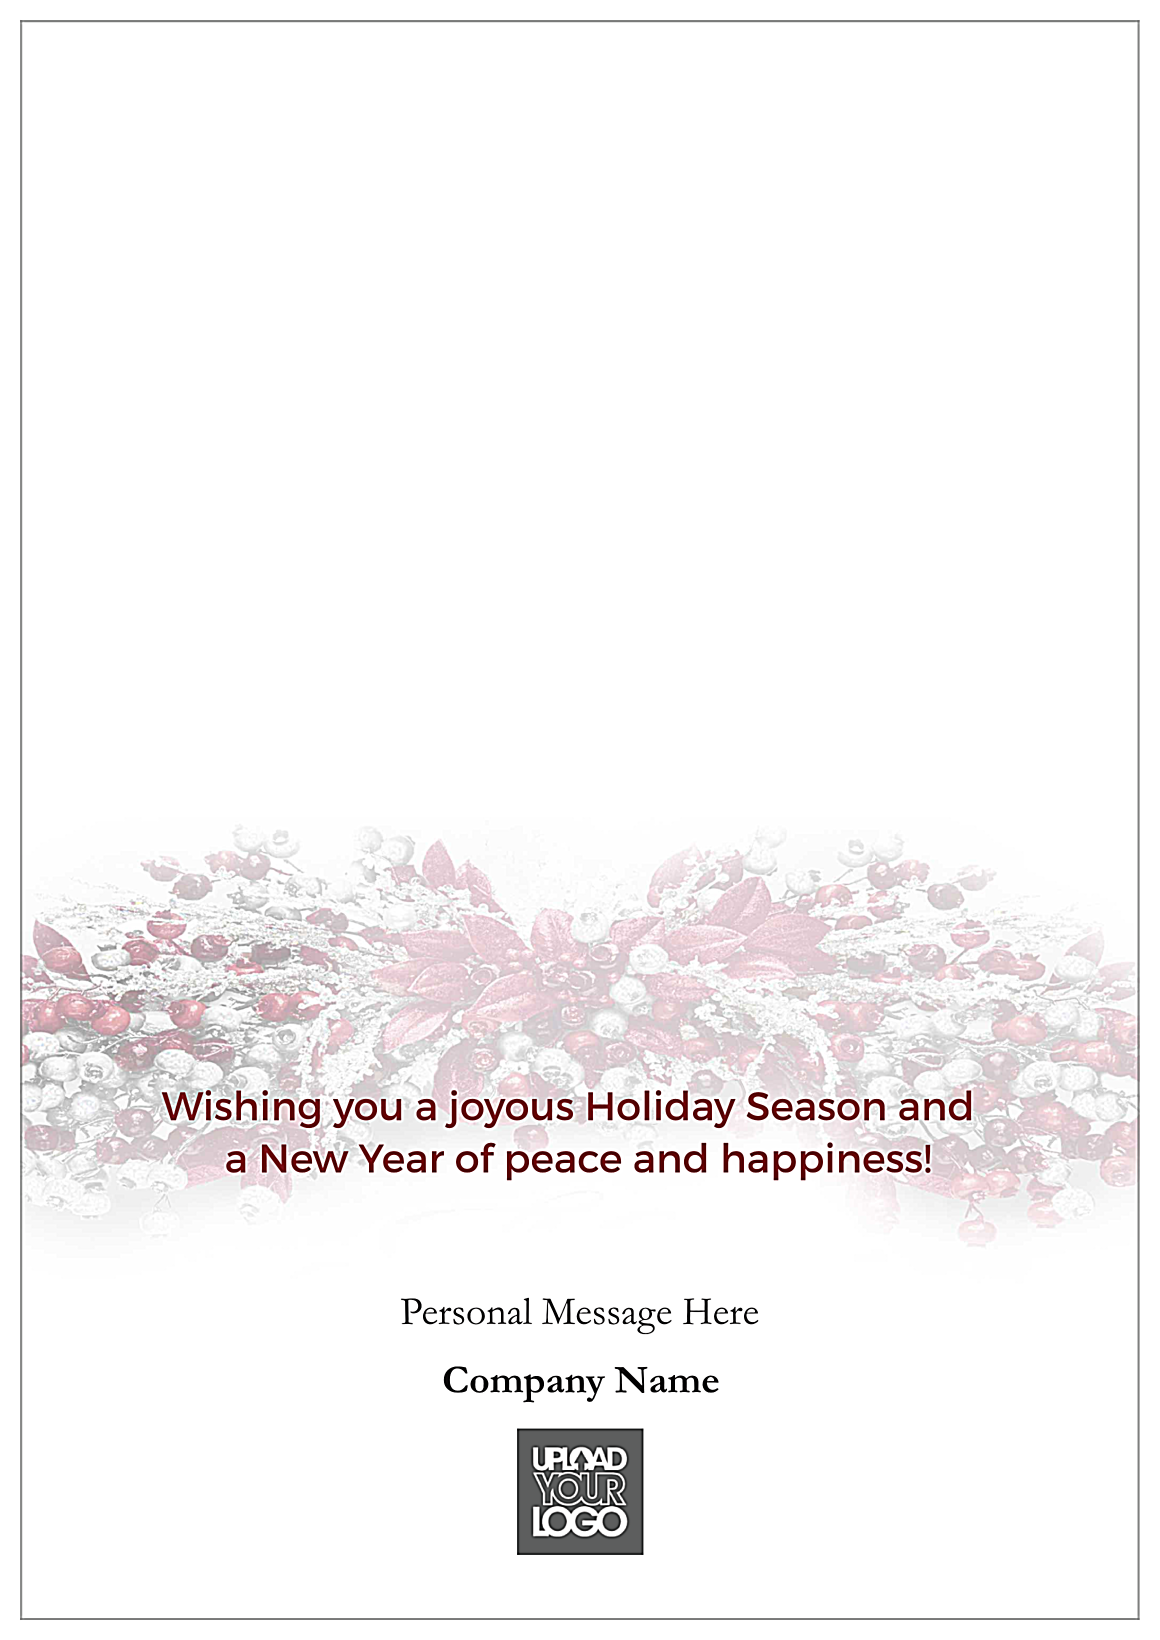 Red Merry Christmas back - Greeting Cards Maker